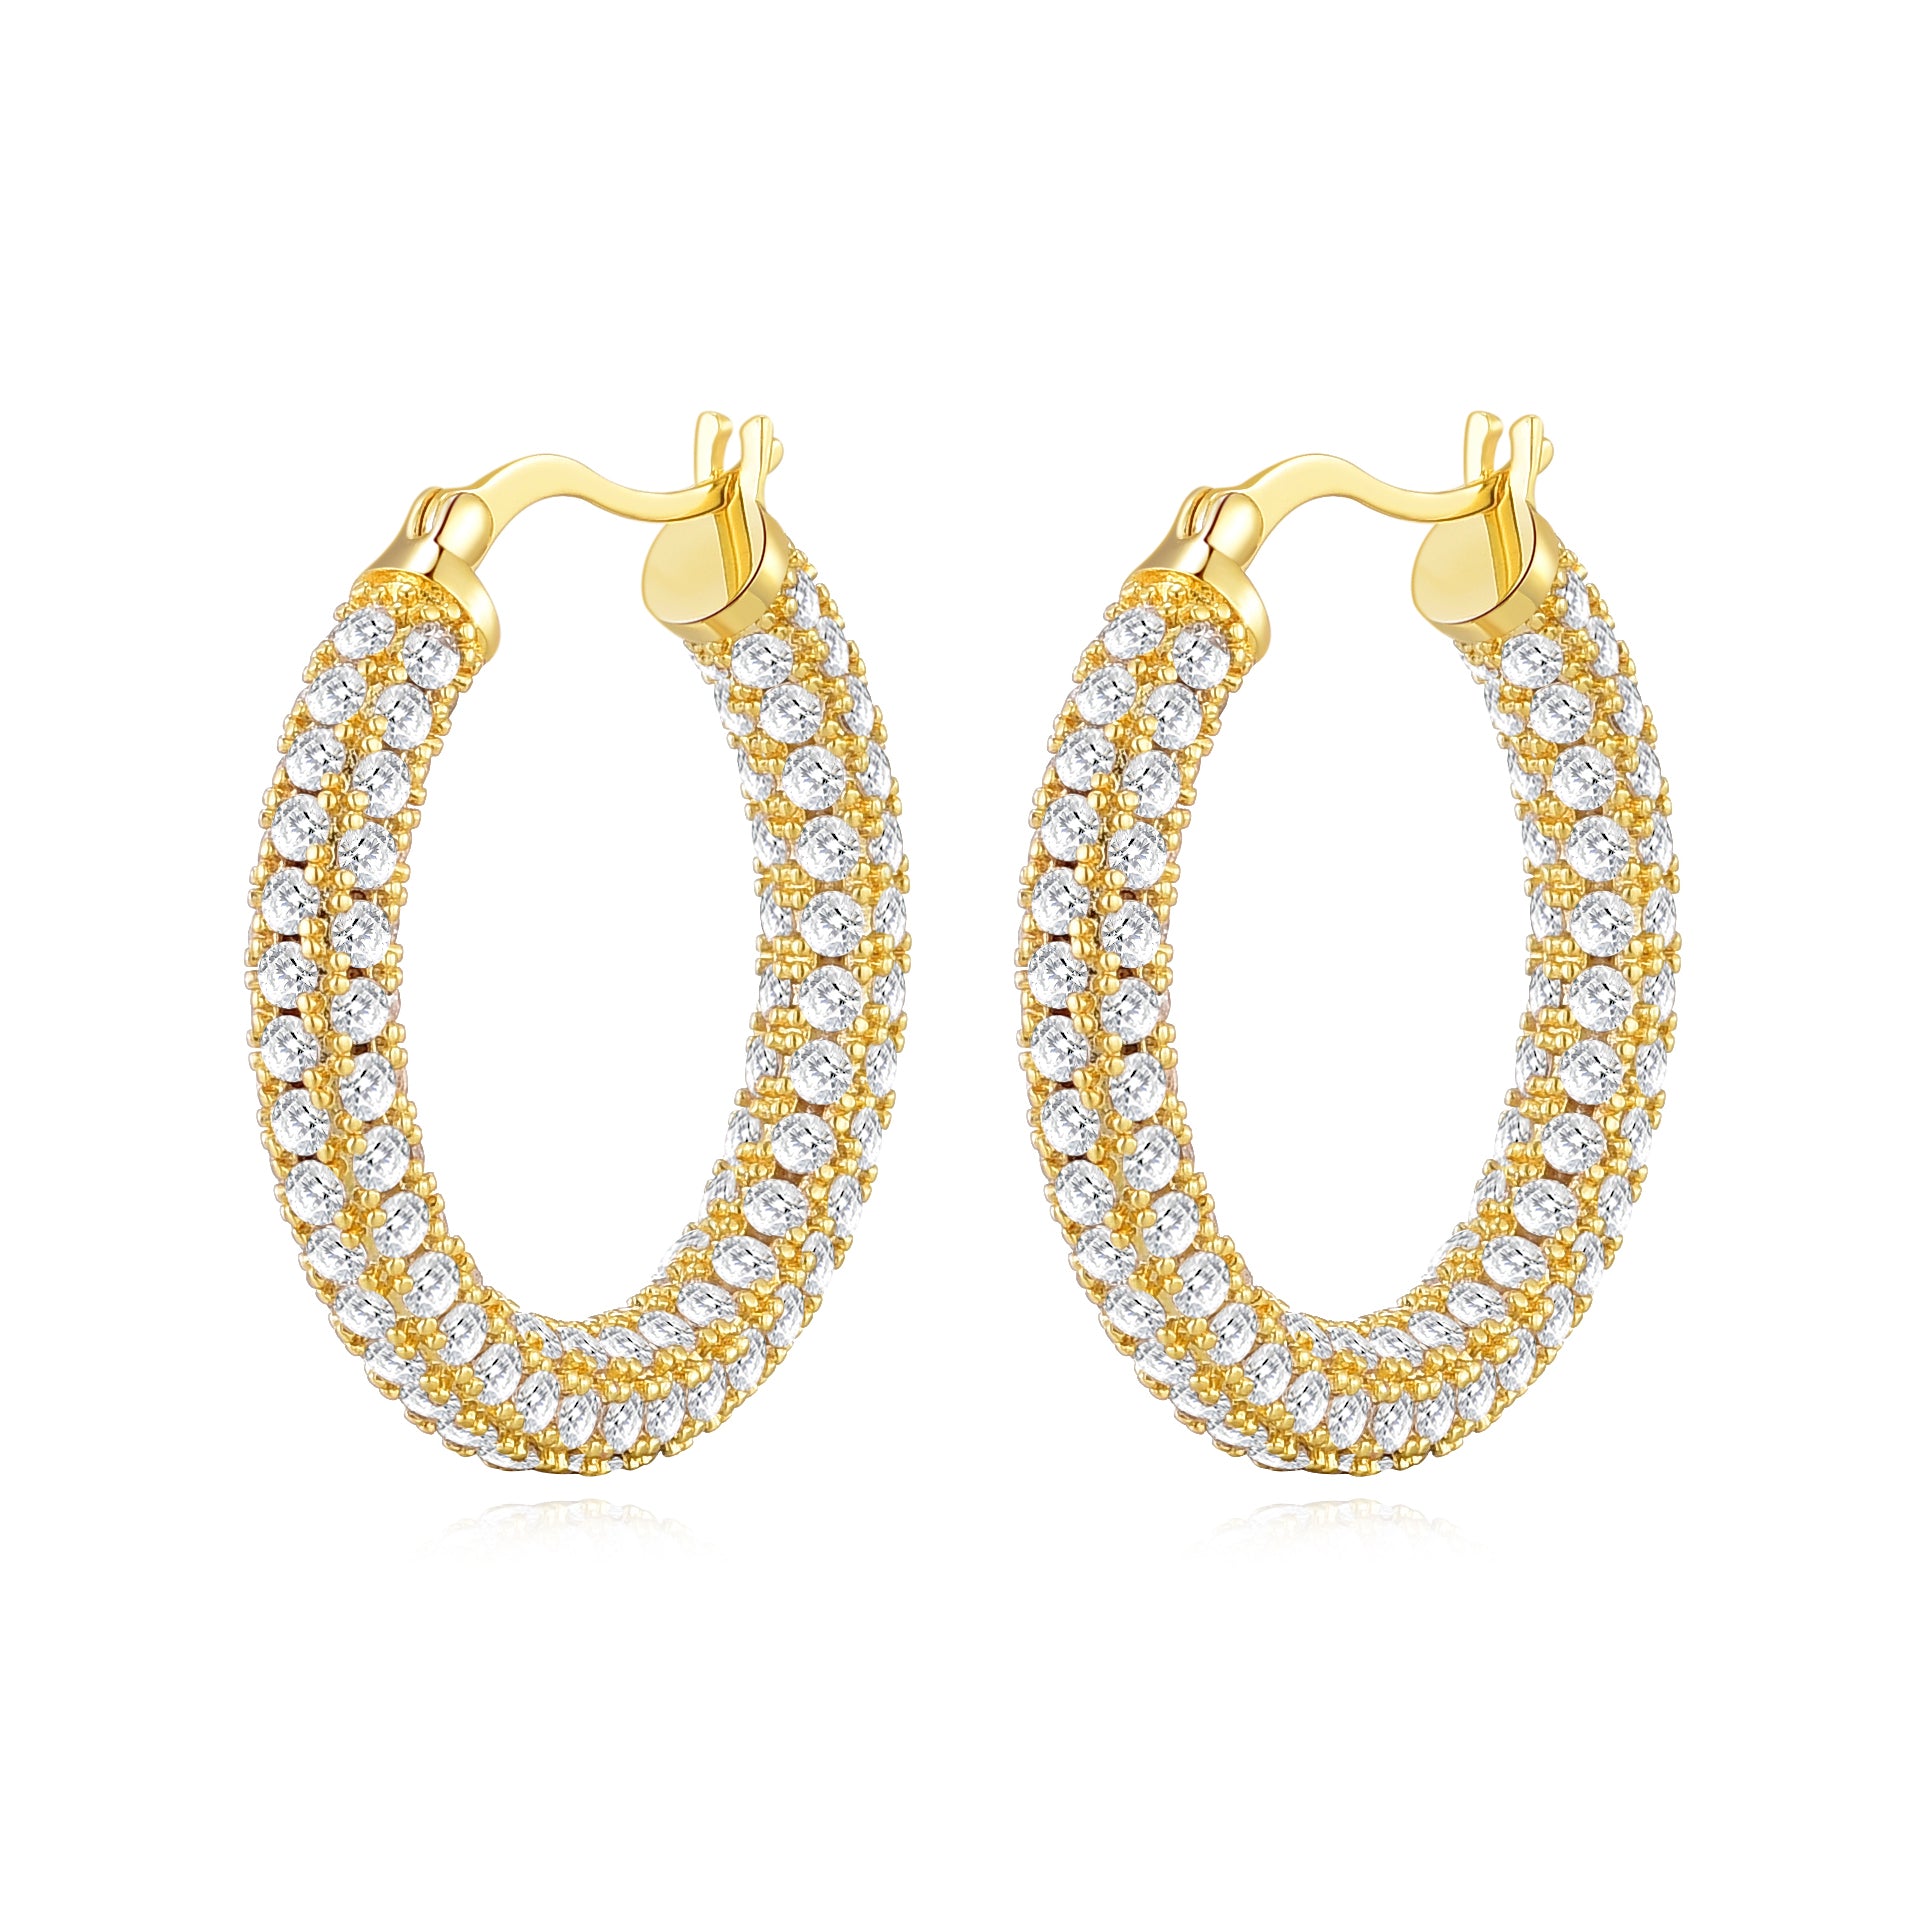 Gold Plated 30mm Pave Hoop Earrings Created with Zircondia® Crystals by Philip Jones Jewellery